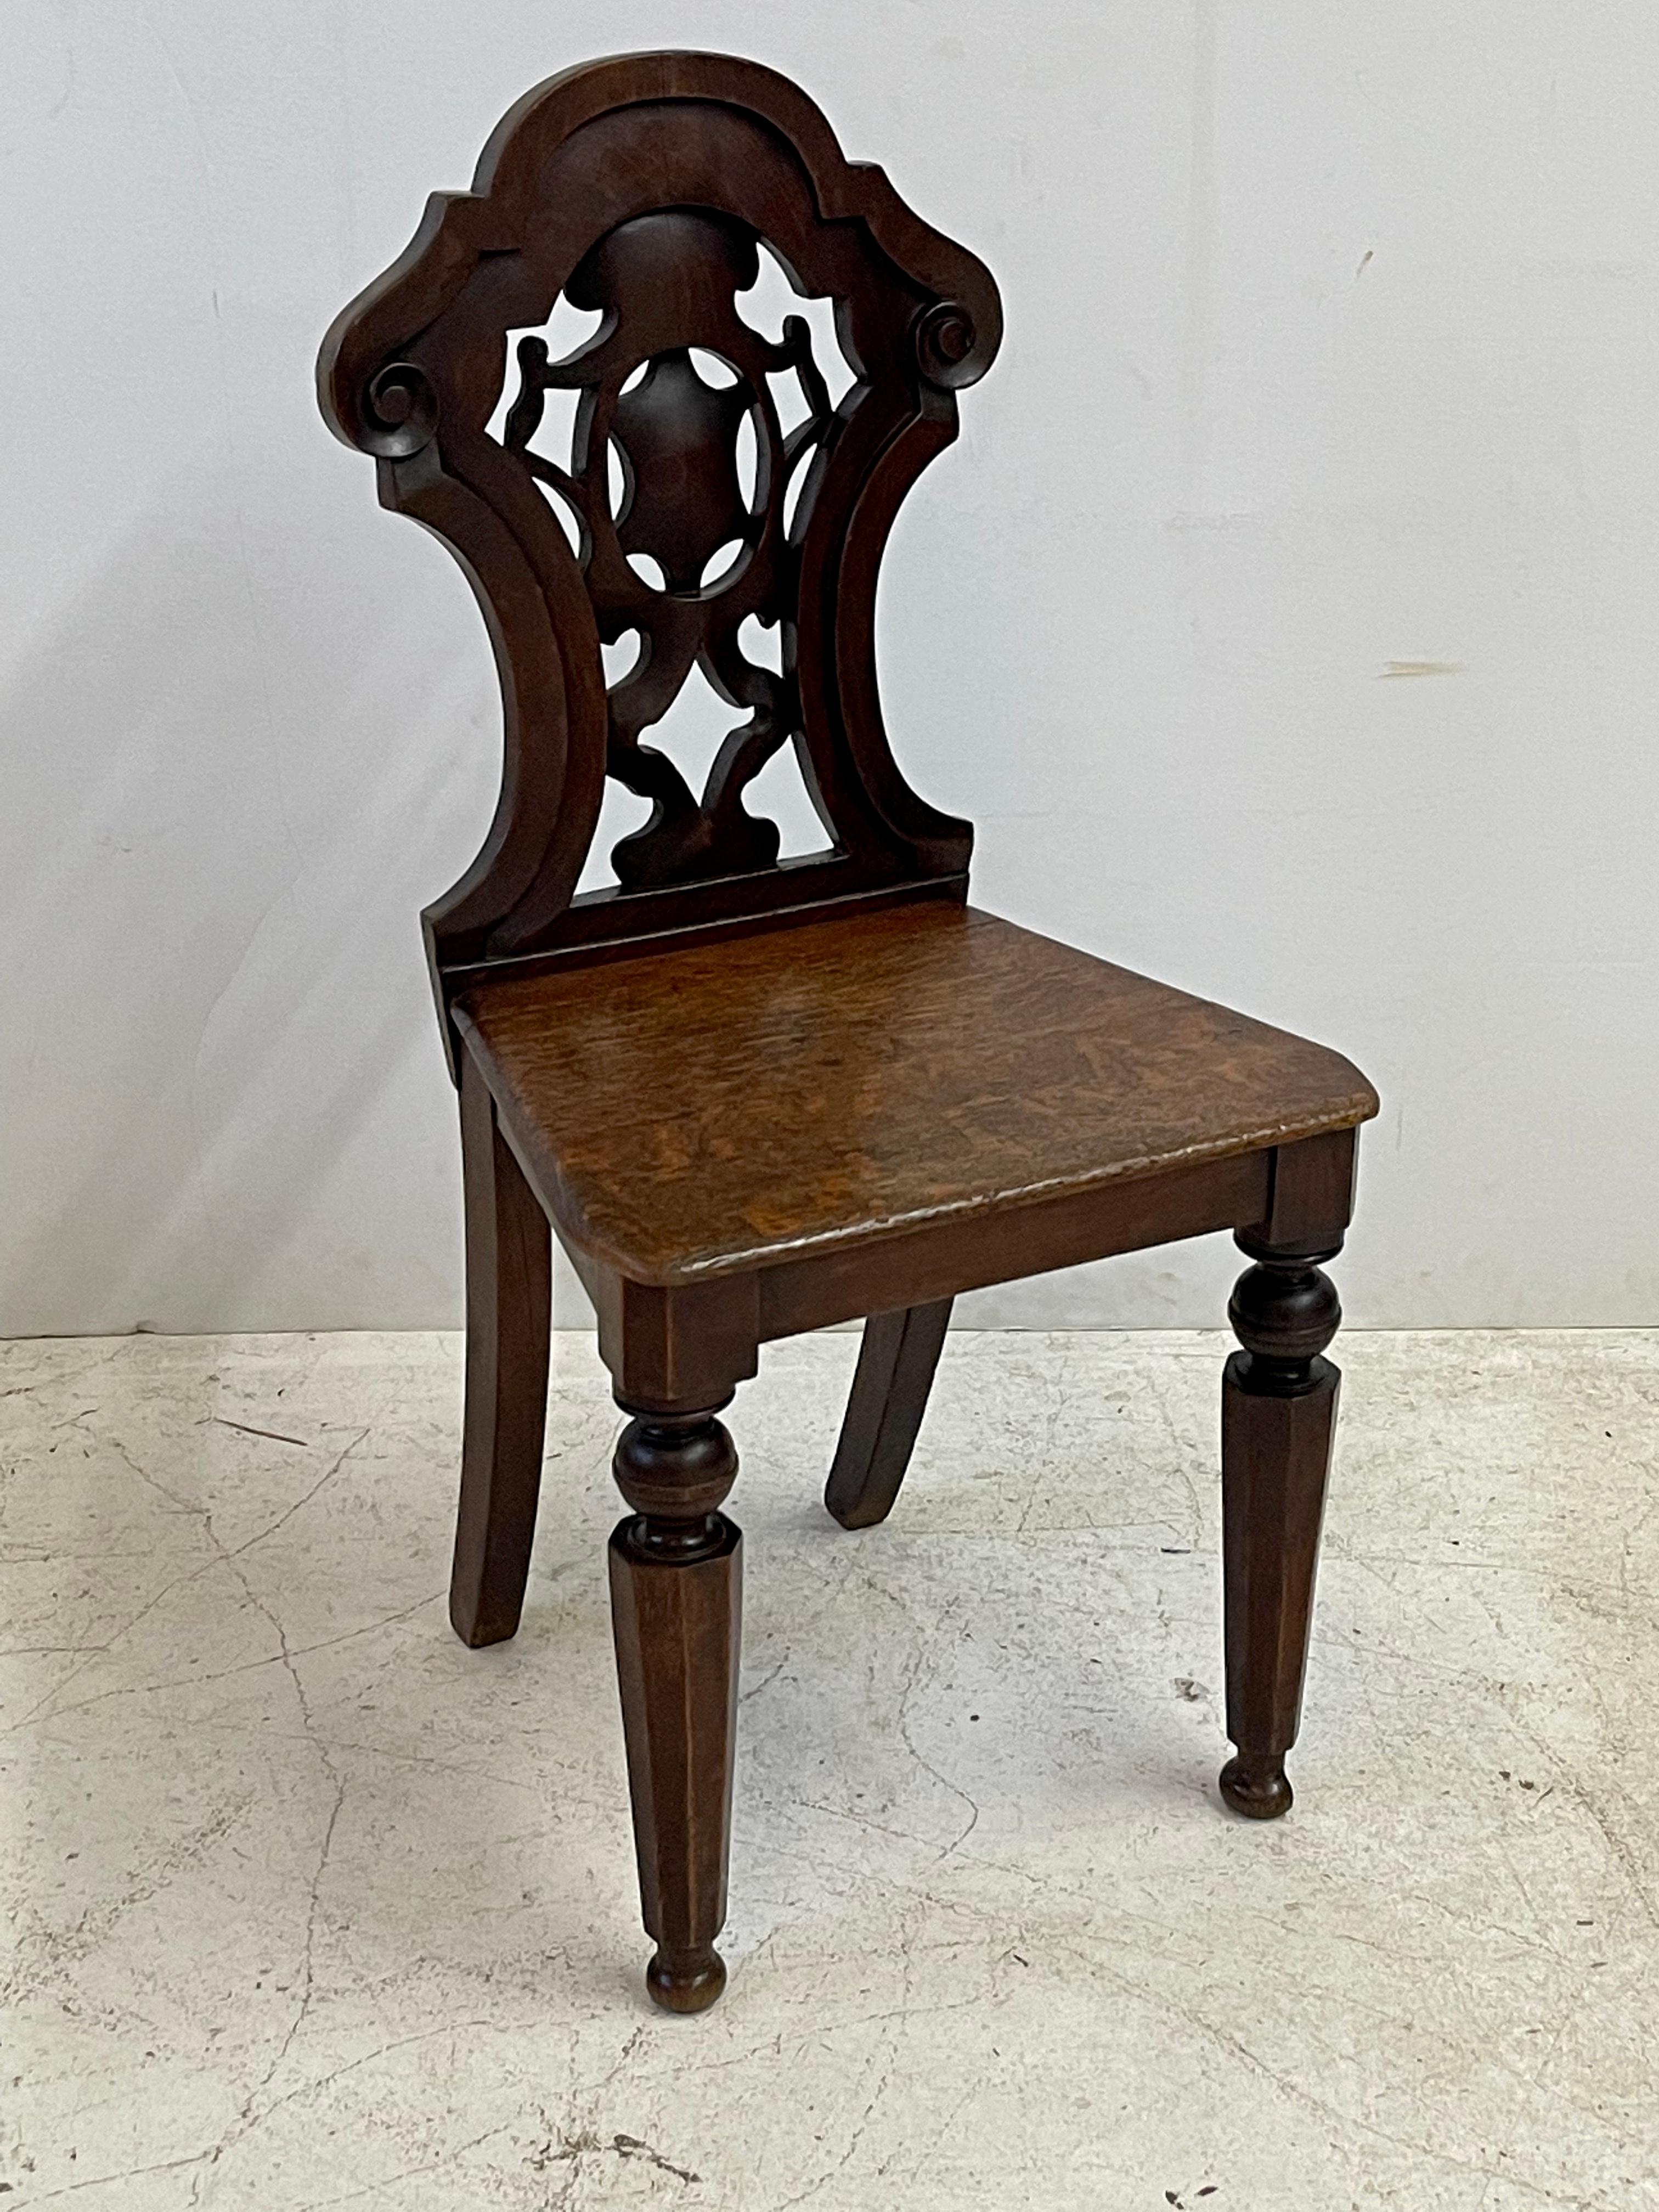 19th century Italian hall chair of oak with a carved and pierced shield back, solid oak seat, and beautifully turned front legs.